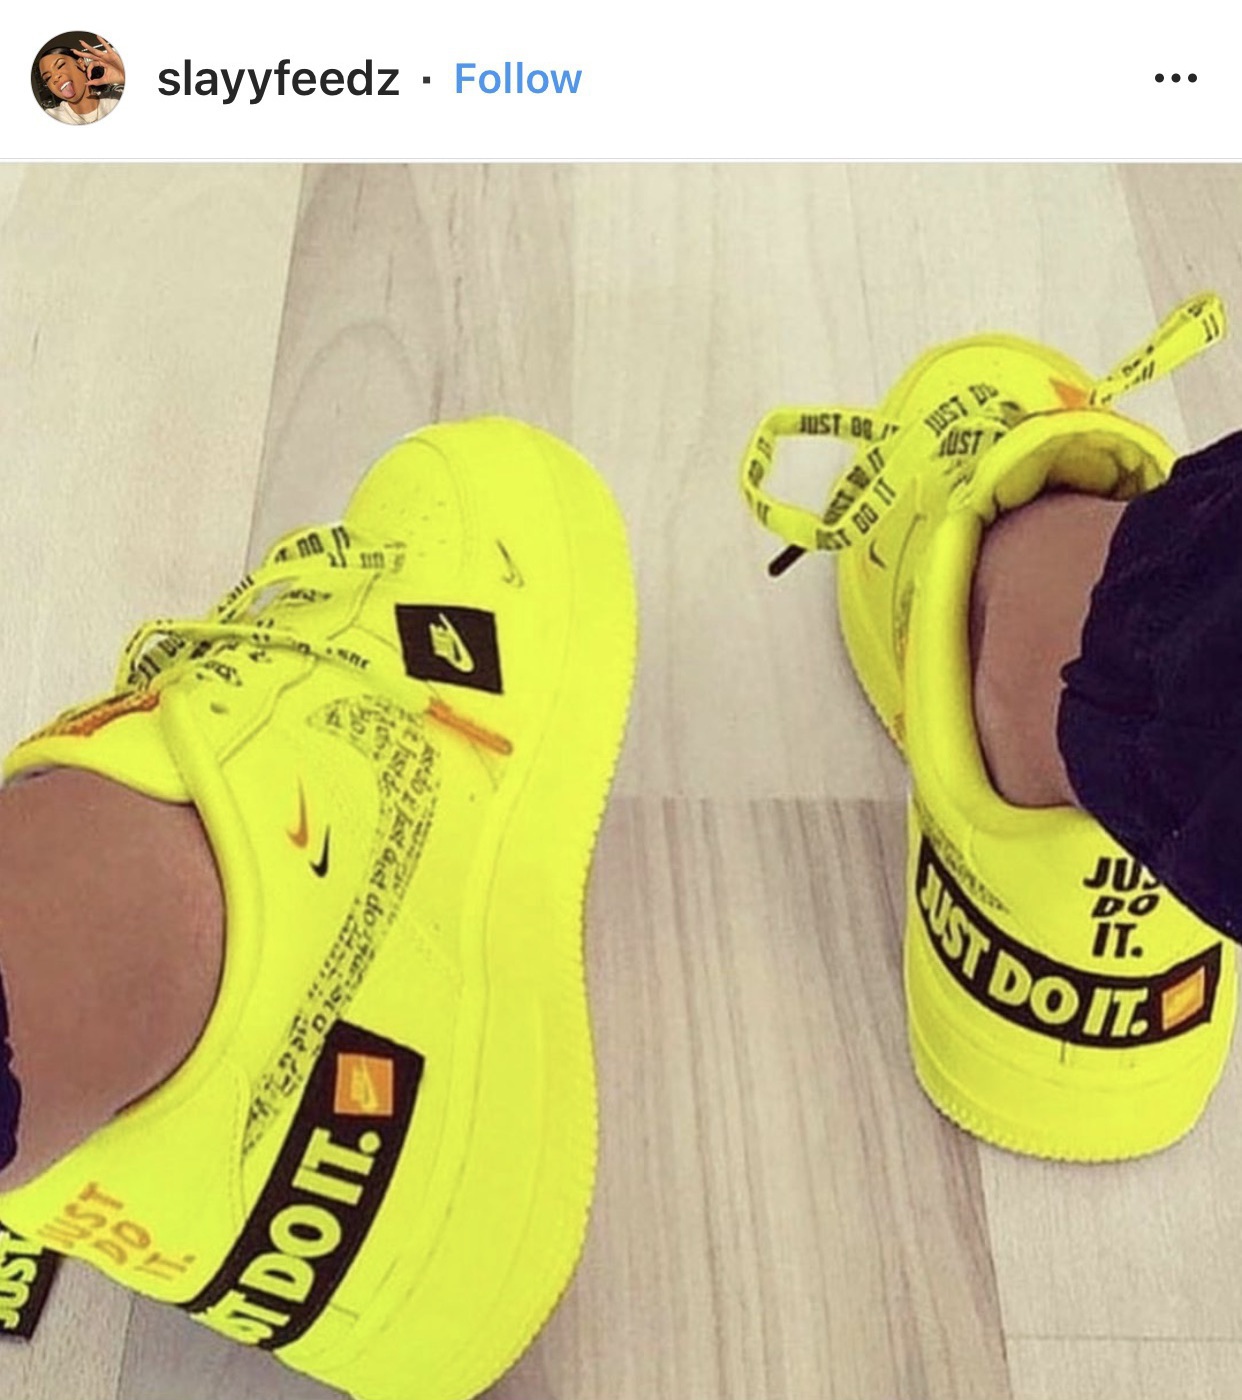 nike fluorescent yellow shoes